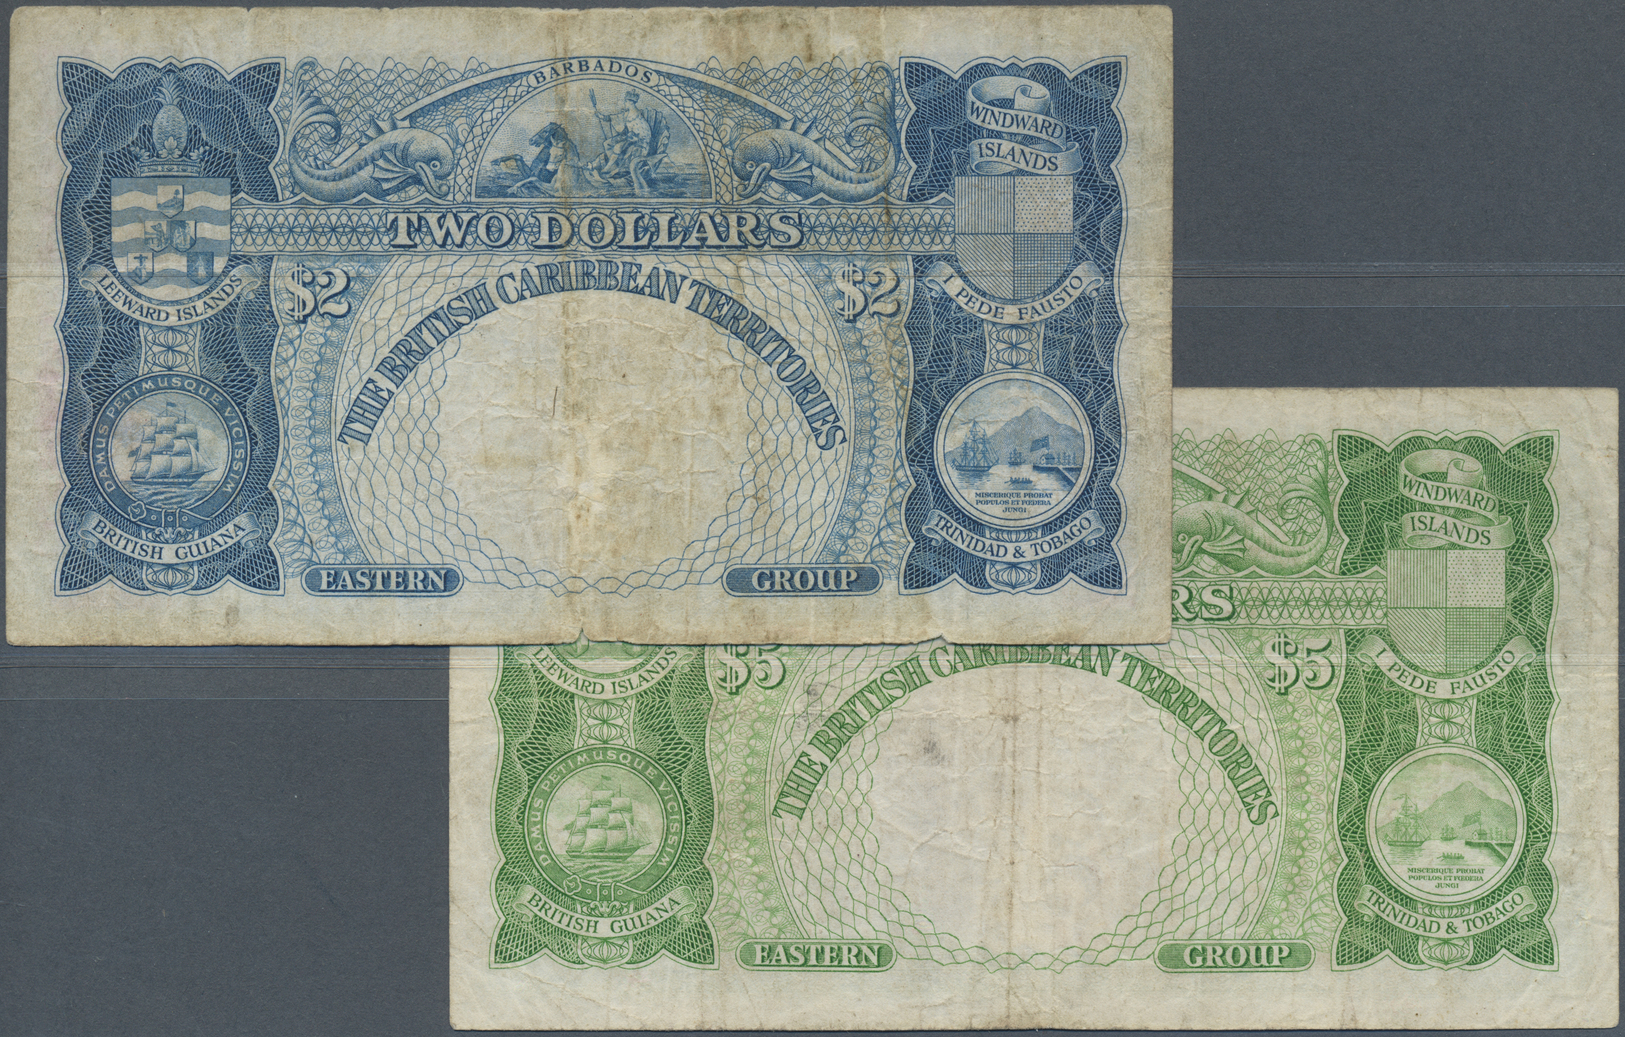 00338 British Caribbean Territories: Set Of 2 Notes Containing 2 Dollars 1950 P. 2 (VG) And 5 Dollars 1951 P. 3 (F-), Ni - Other - America